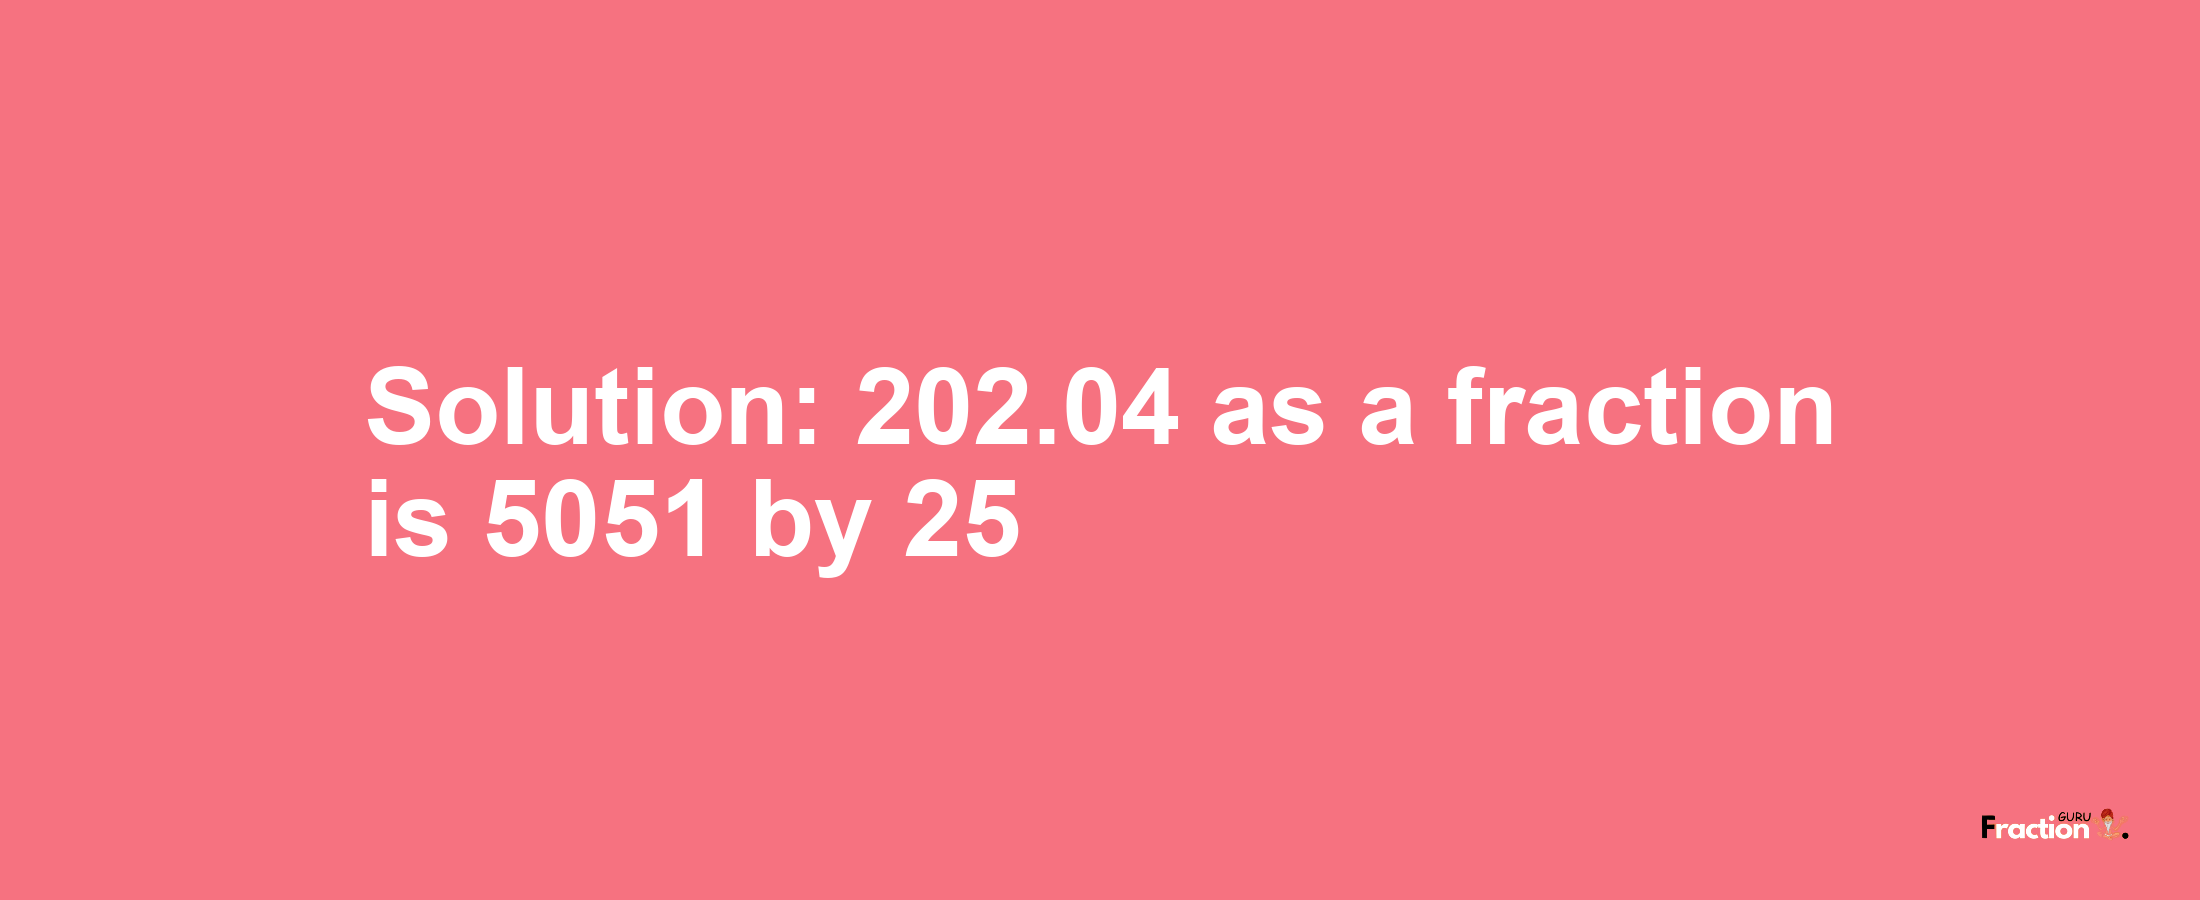 Solution:202.04 as a fraction is 5051/25